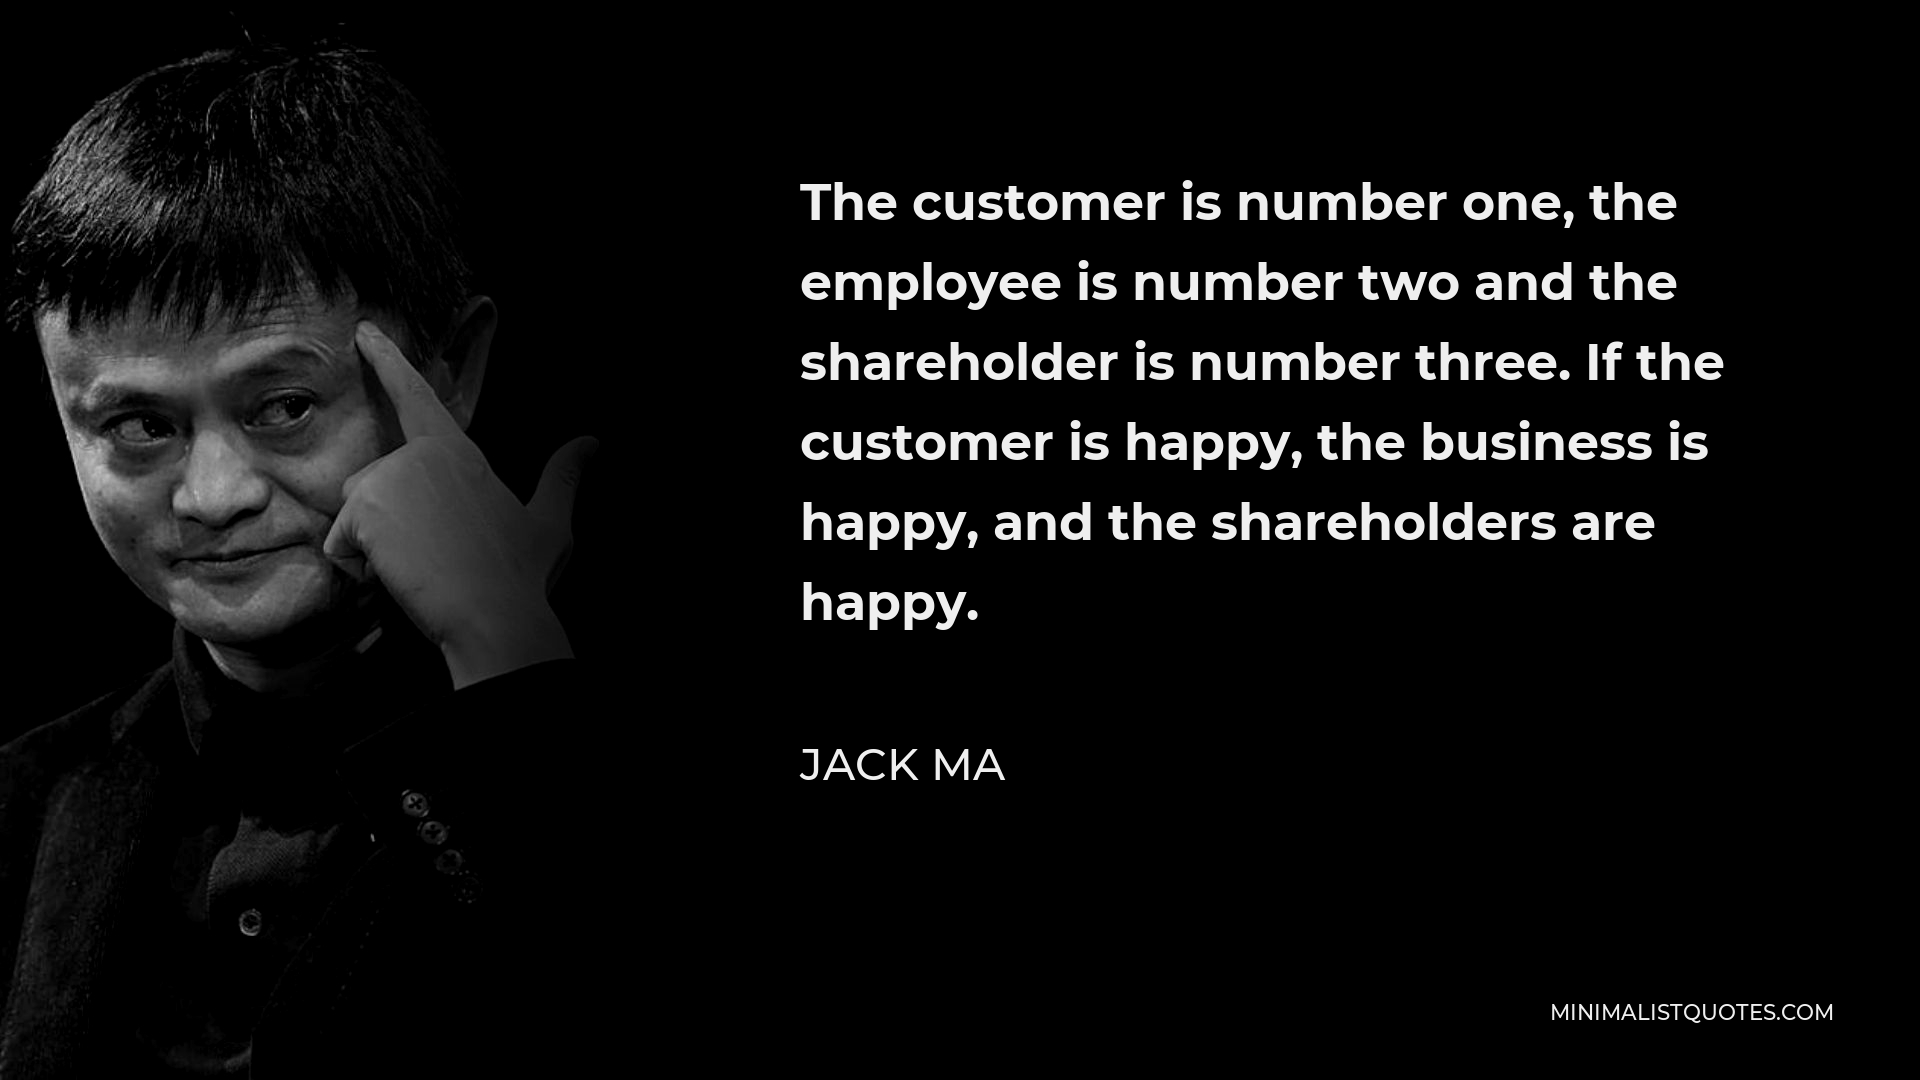 Jack Ma Quote - The customer is number one, the employee is number two and the shareholder is number three. If the customer is happy, the business is happy, and the shareholders are happy.